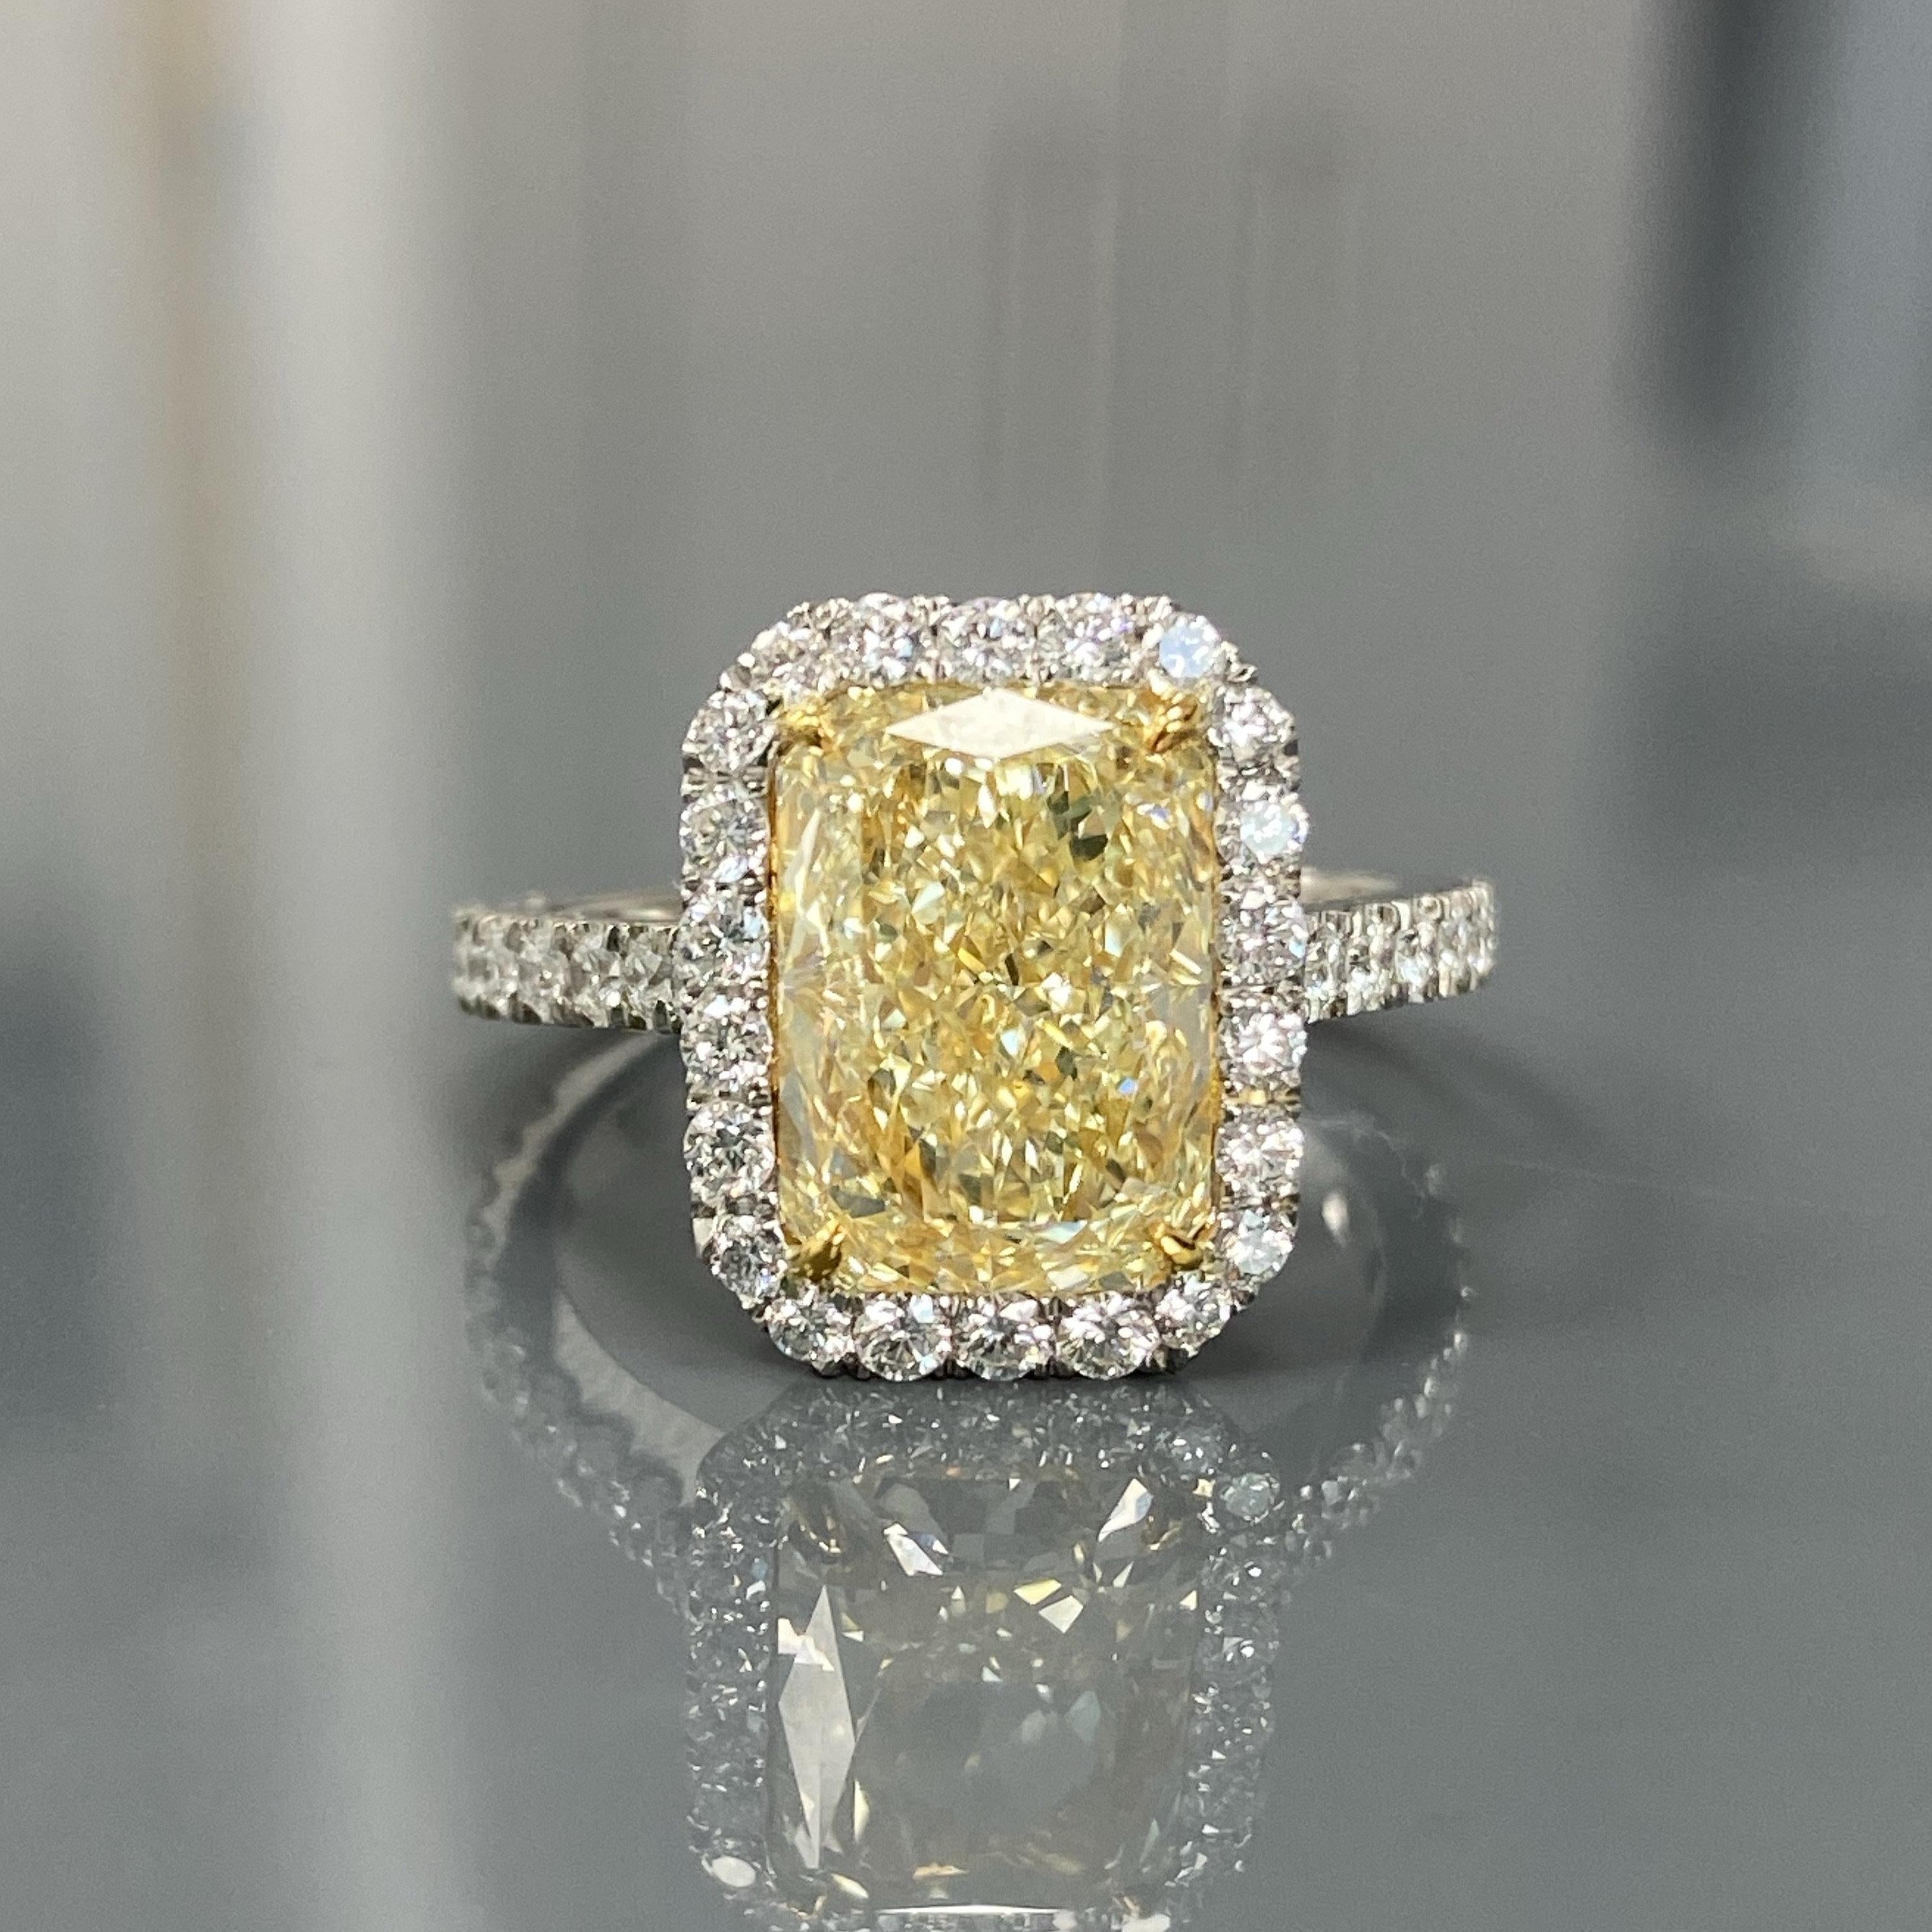 Beautiful canary diamond ring with great life and shine

4.03 Carat
W-X Color 
Radiant Cut 
VS2 Clarity 
0.66 Carats of White Rounds 
Set in Platinum and 18k Yellow Gold
Handmade in NYC
Size 6.5

Color faces up like a Fancy Yellow